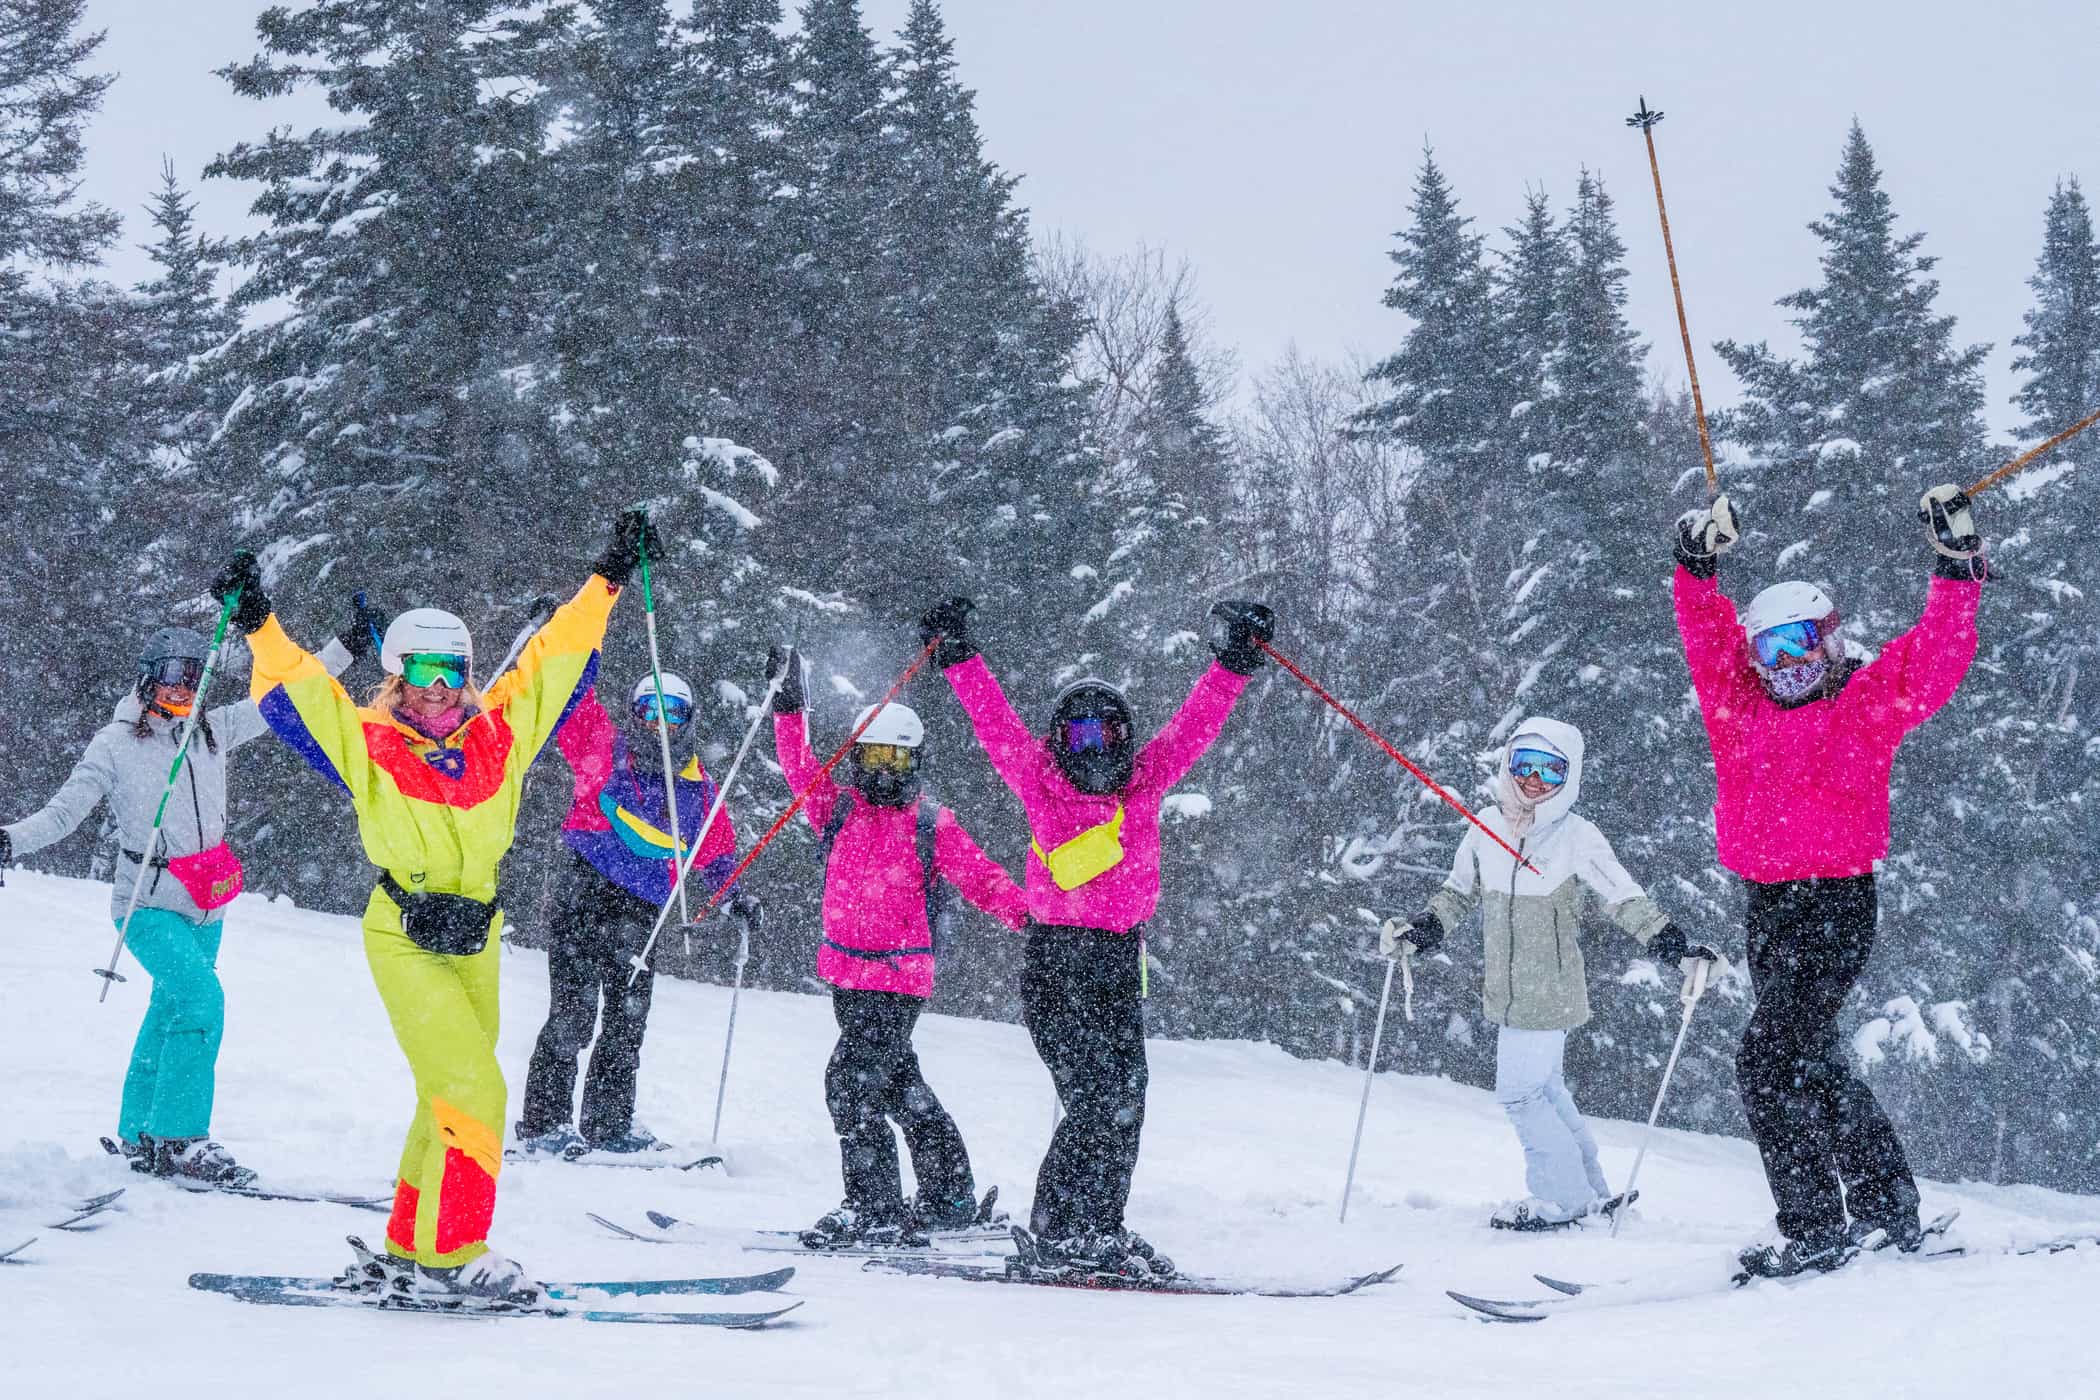 skiers in bright clothing celebrating snow